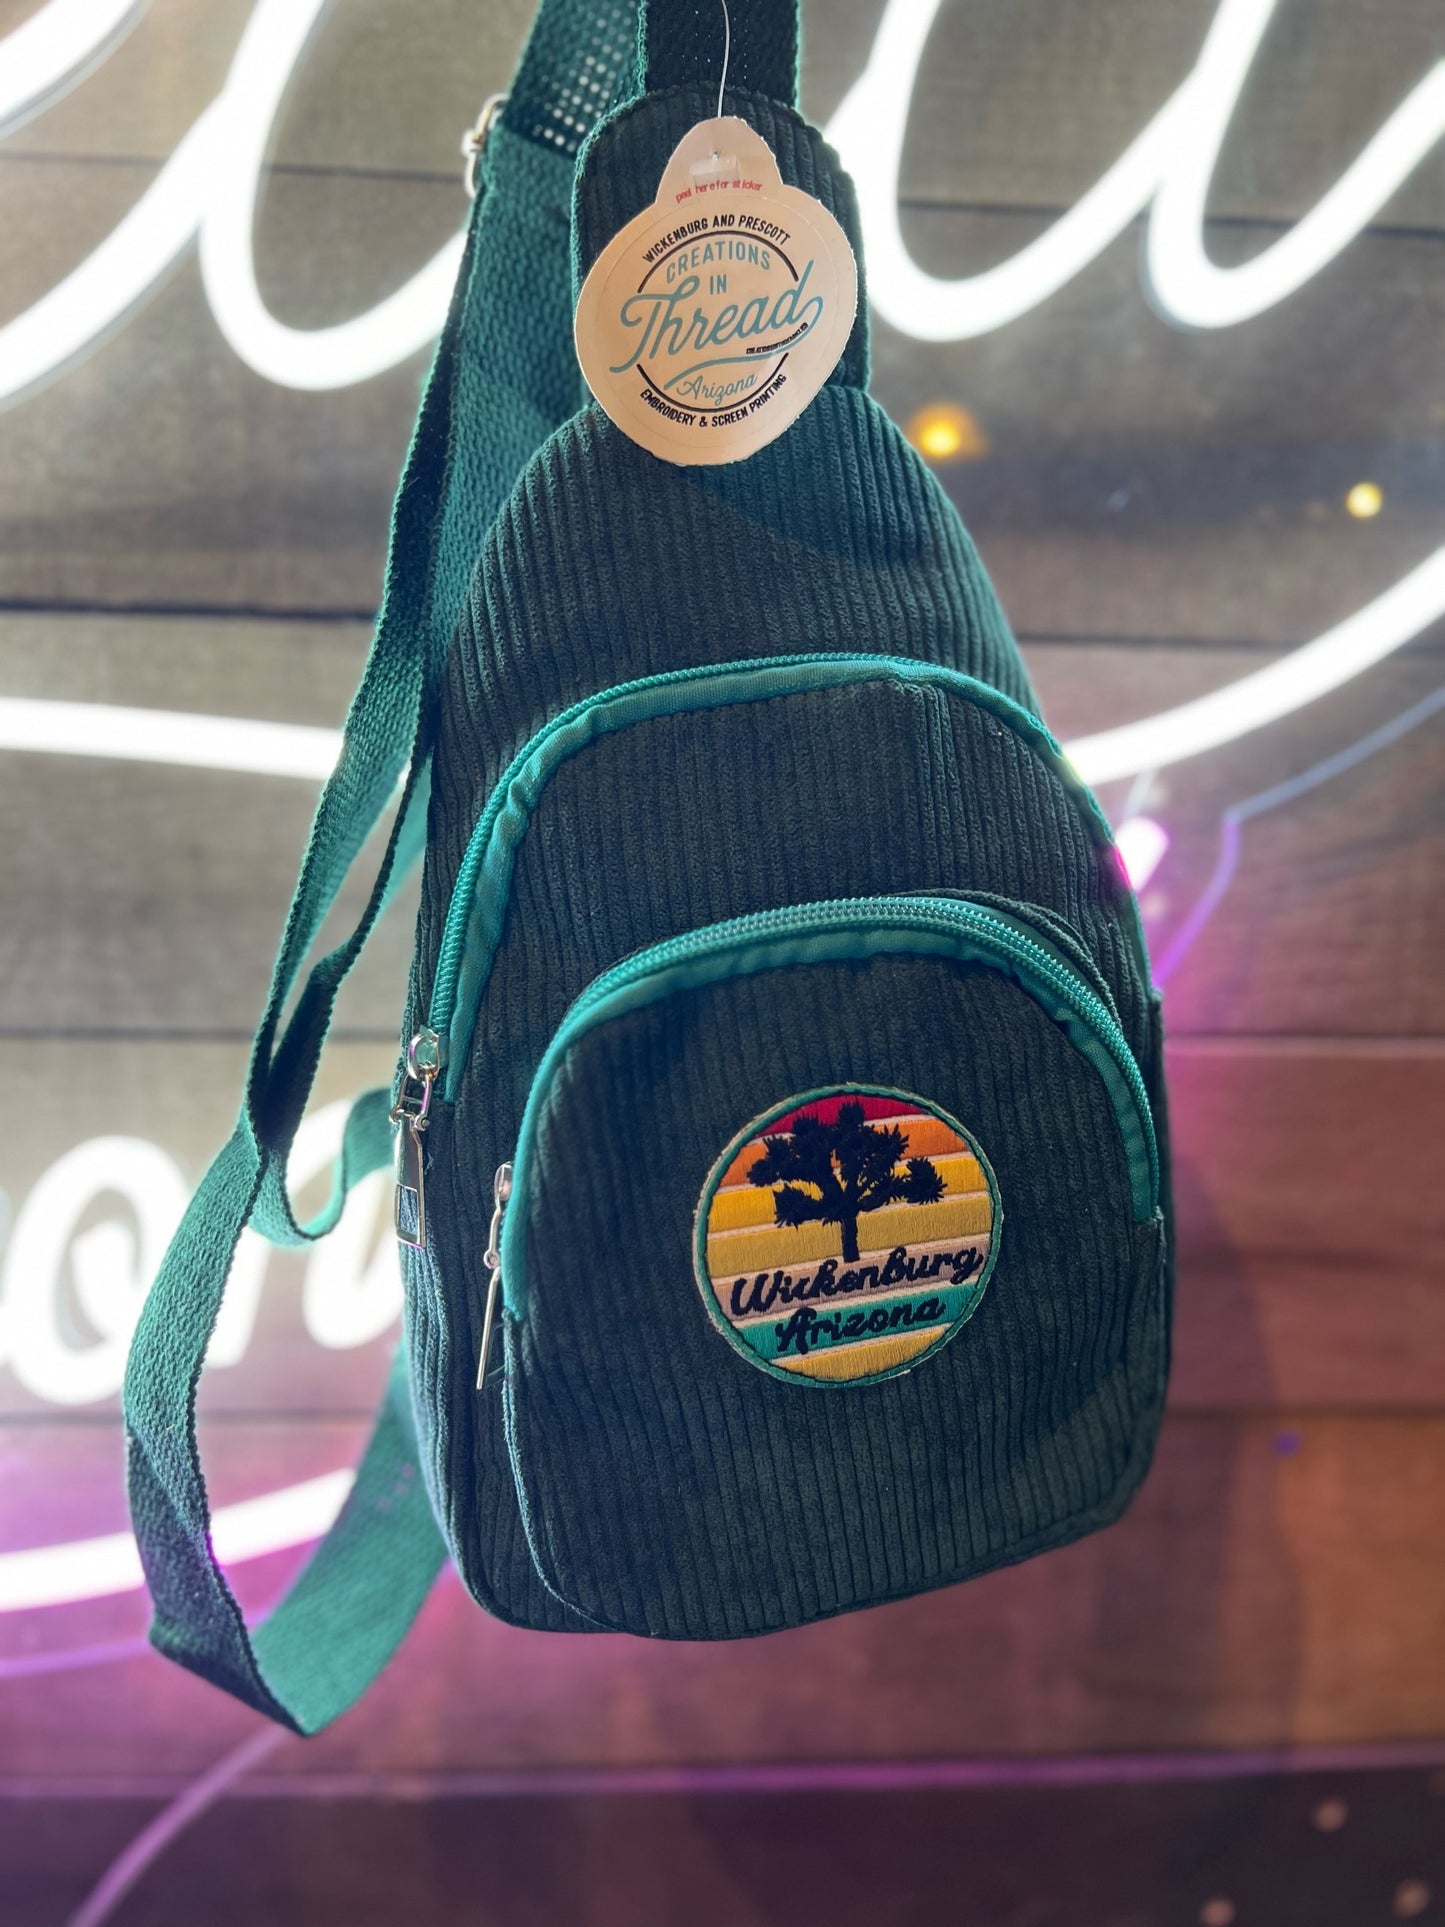 Sling Bags With Patches